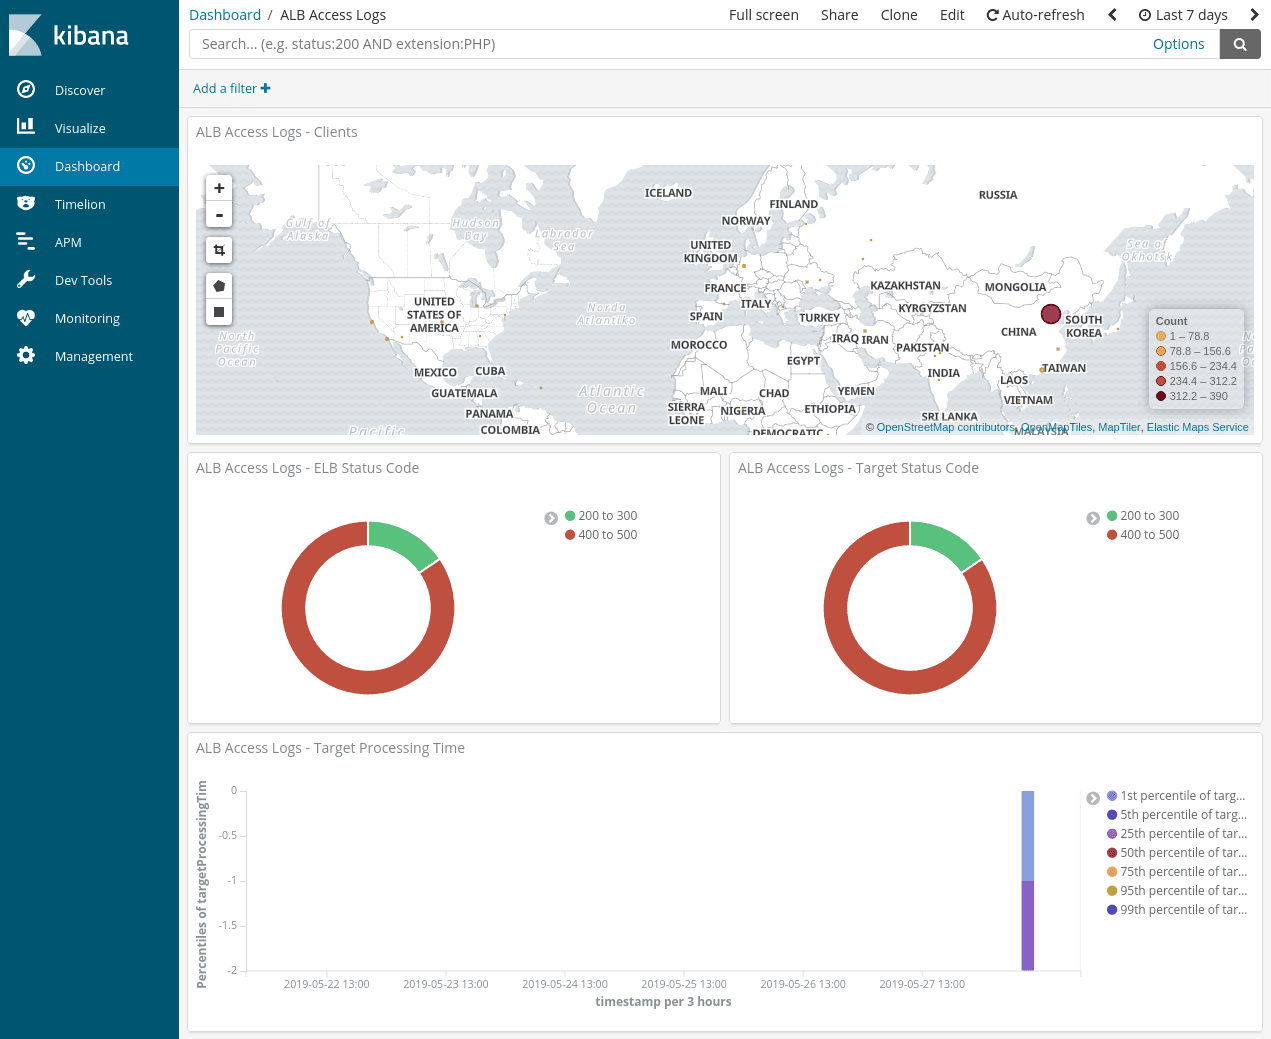 A Kibana dashboard showing charts with the distribution of status codes, a map of client locations and a chart of response time percentiles